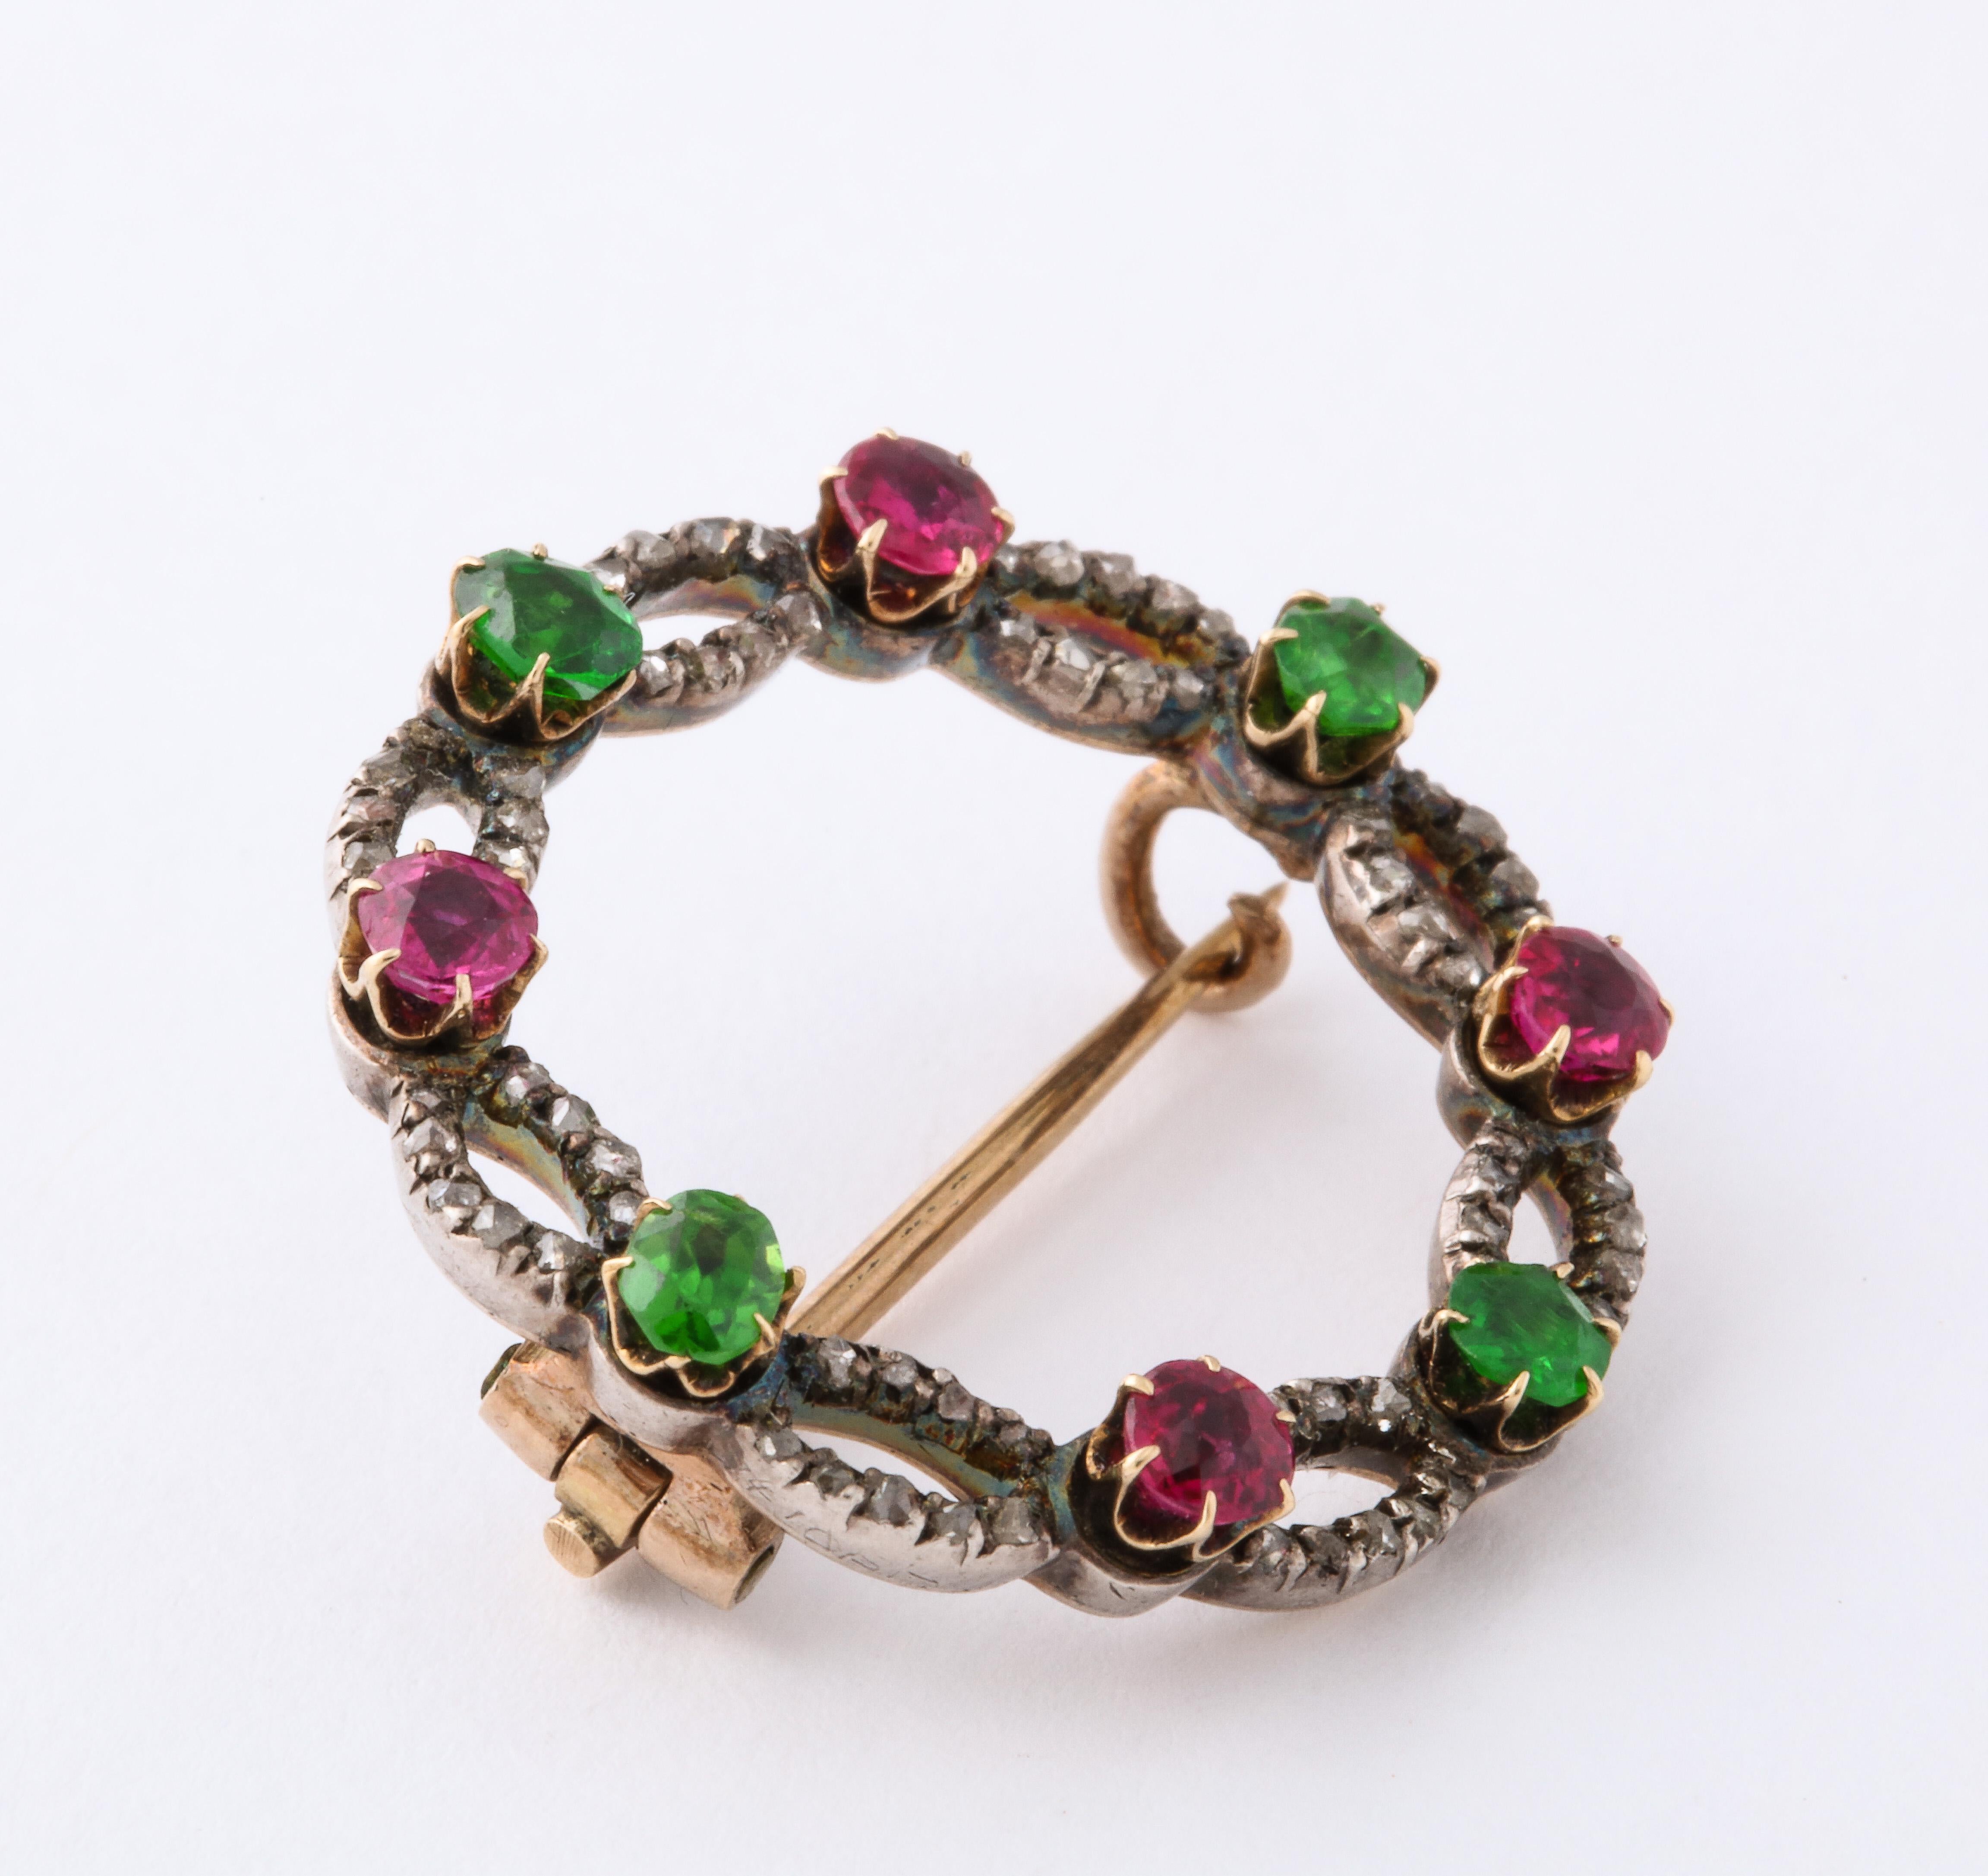 Lovely little circular brooch with sections of rose cut diamonds divided by alternating rubies and demantoid garnets. Silver on yellow gold. Just under 1